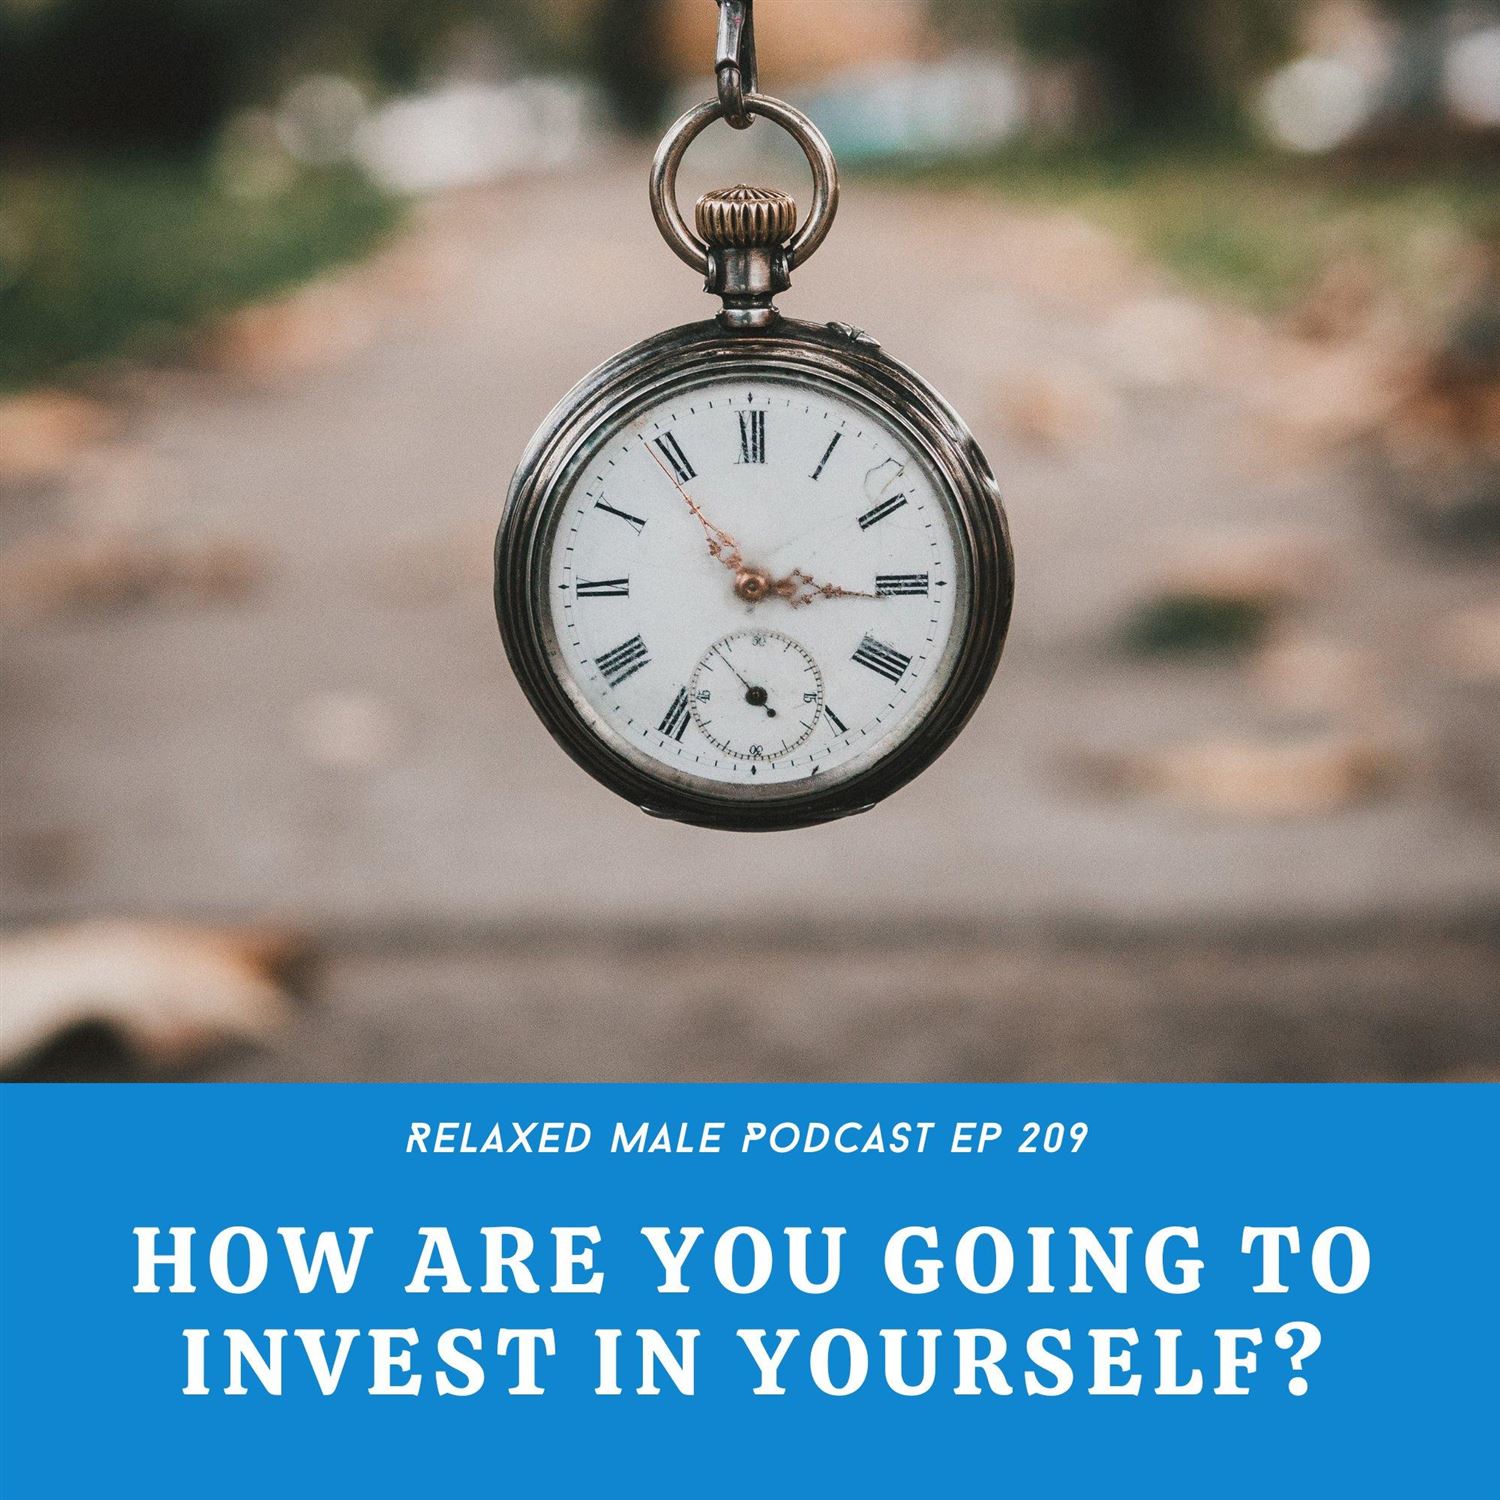 How are you going to invest in yourself?